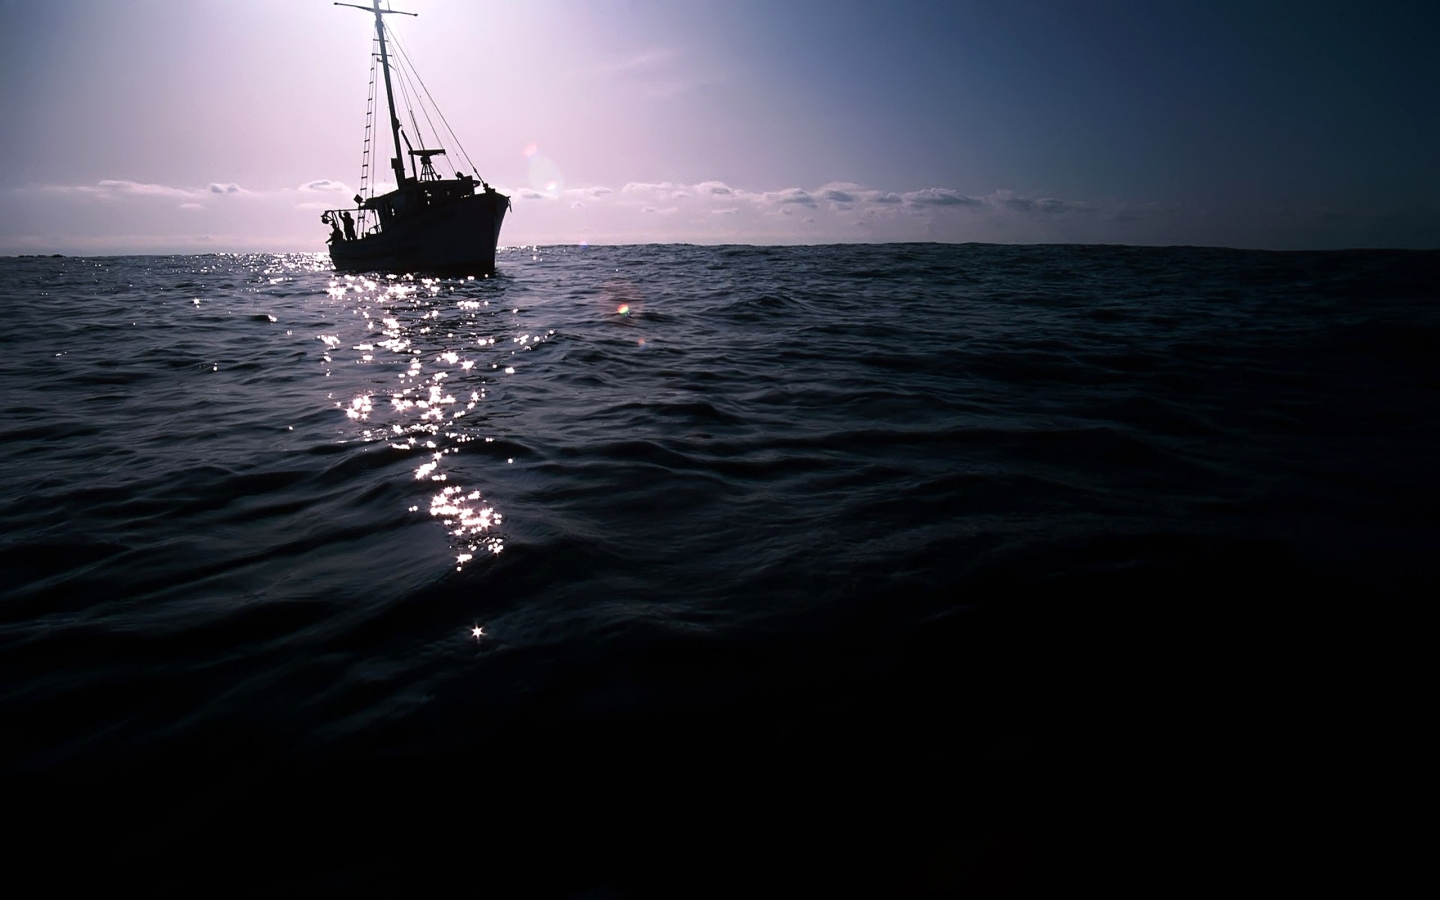 The Dark Boat on Sea for 1440 x 900 widescreen resolution